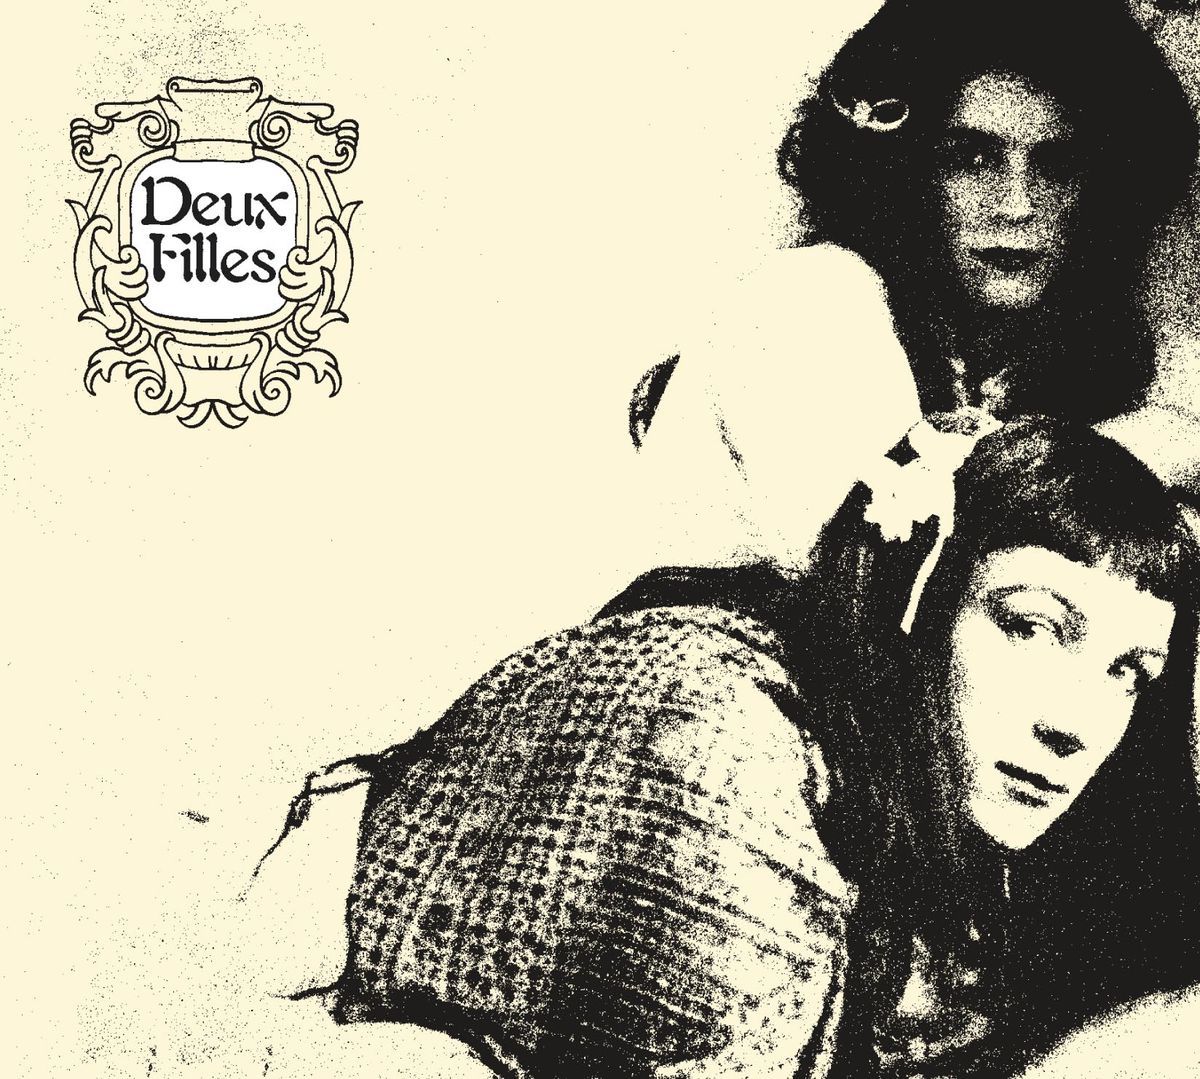 Dark Entries resurfaces two albums by Deux Filles